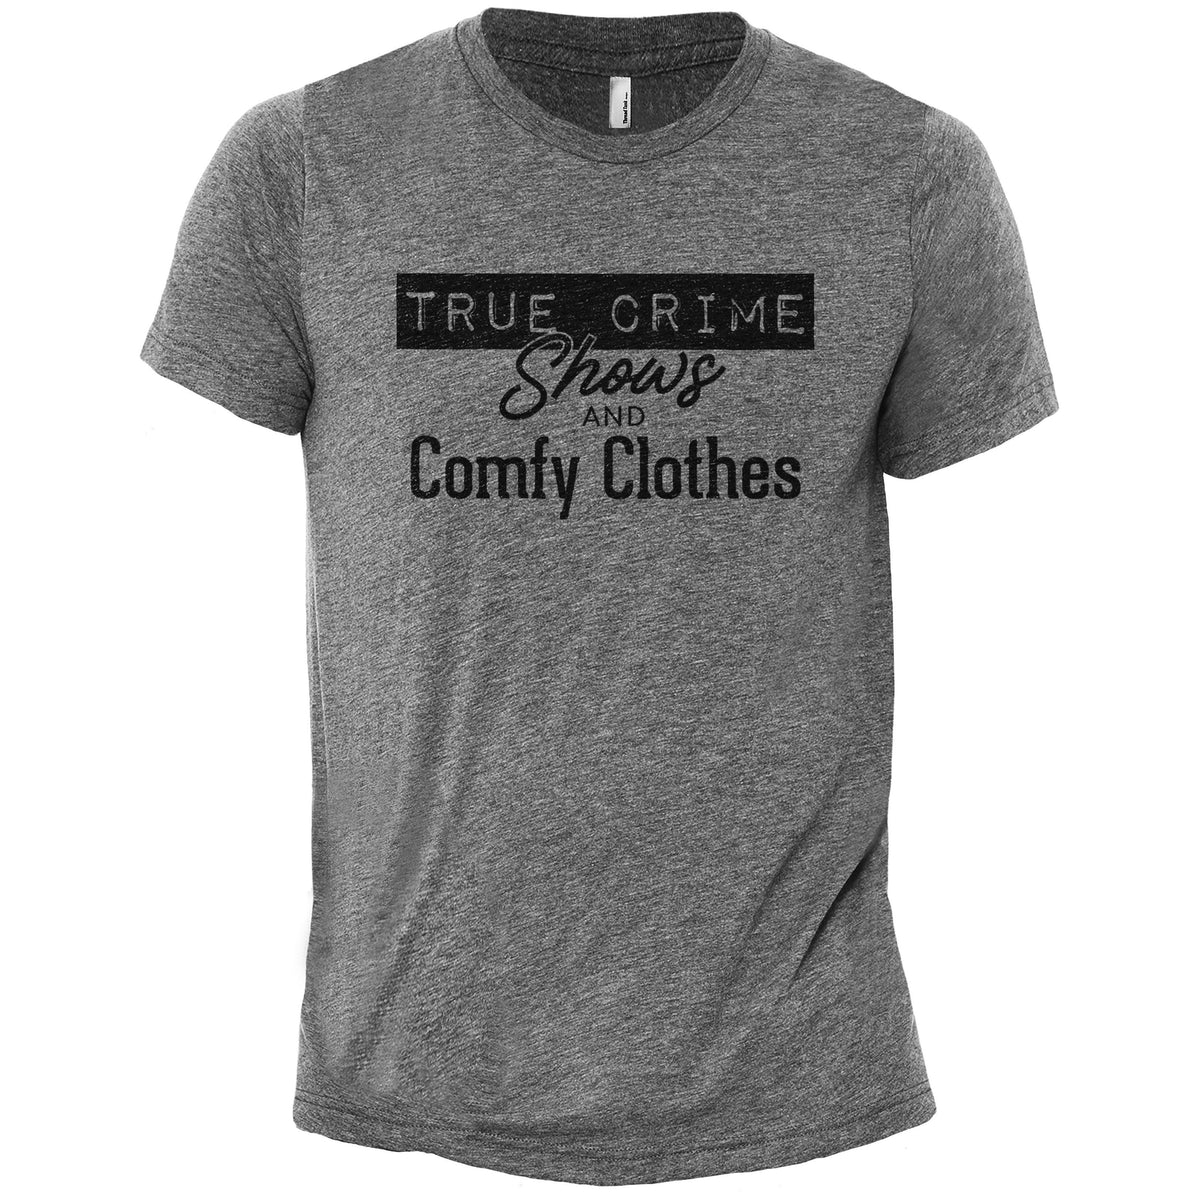 True Crime Shows And Comfy Clothes Printed Graphic Men's Crew T-shirt Tee